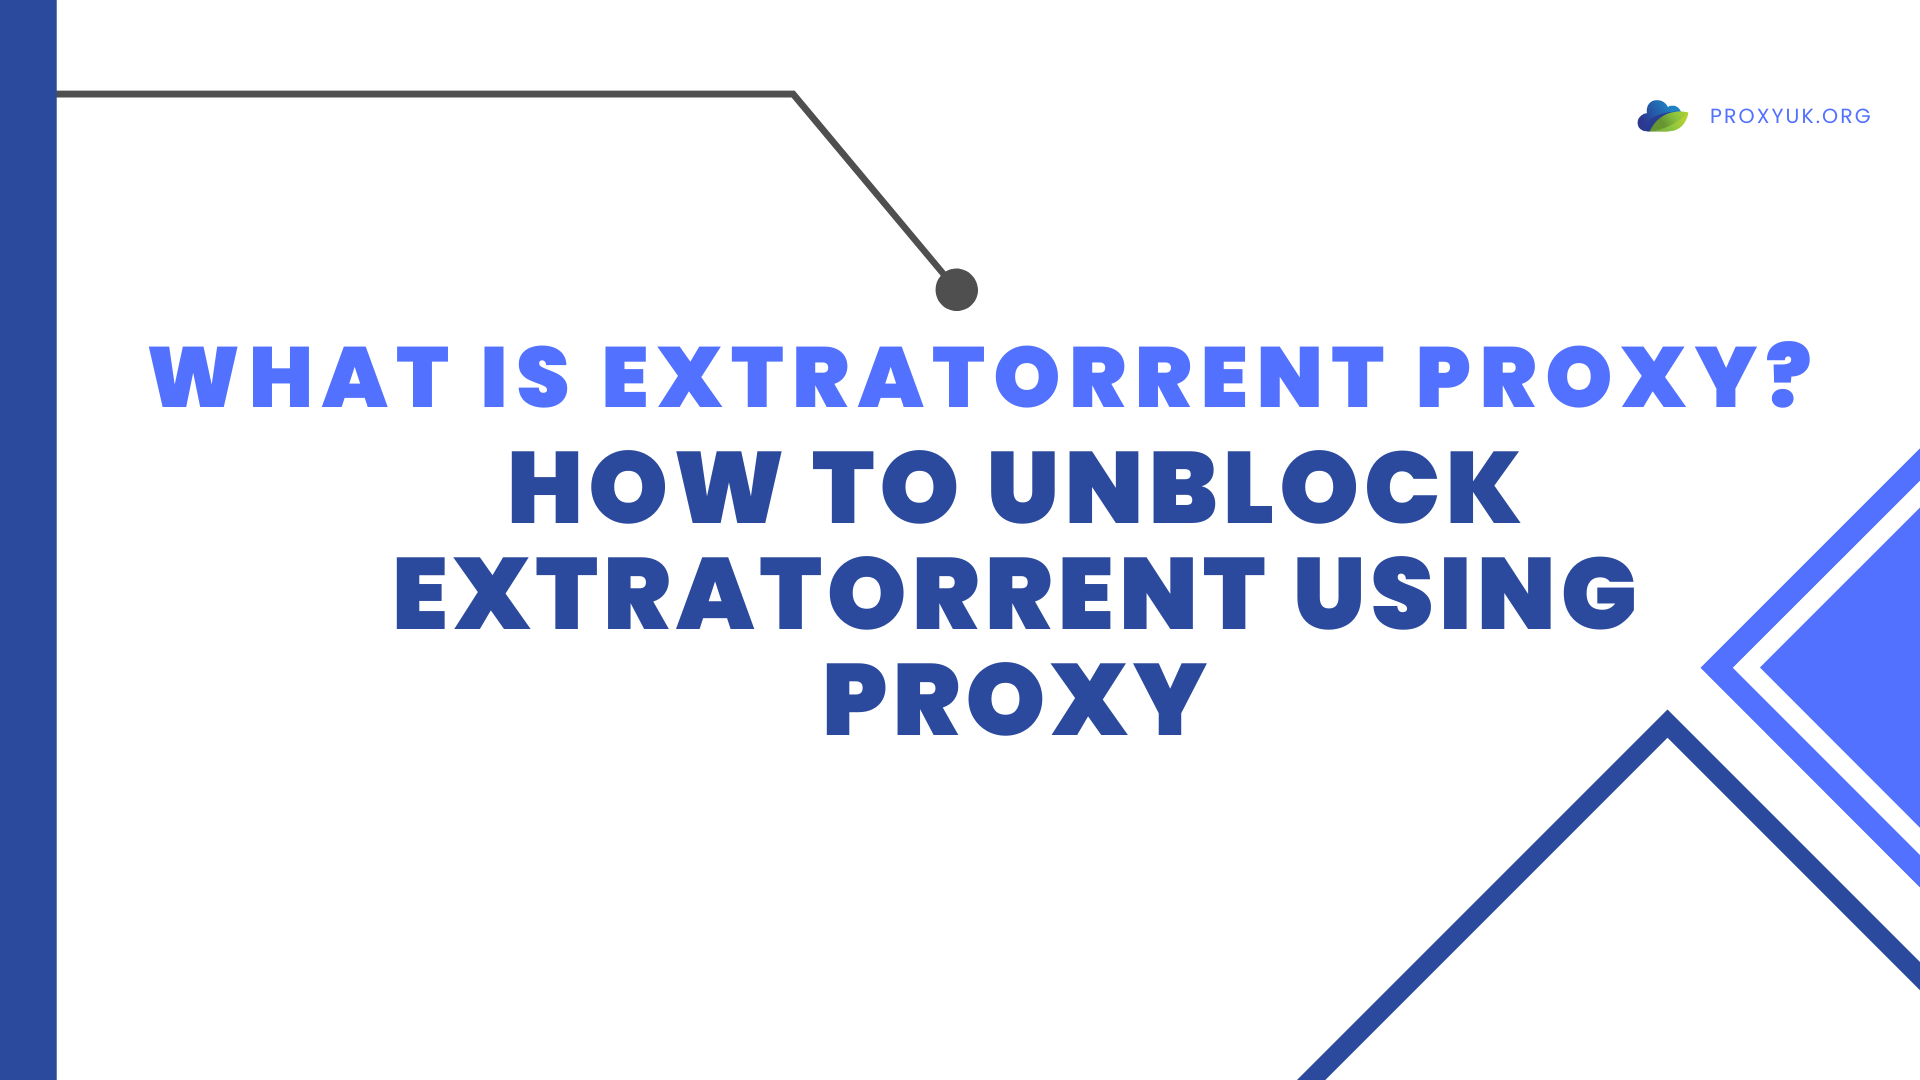 What is ExtraTorrent Proxy? How to unblock ExtraTorrents using Proxy